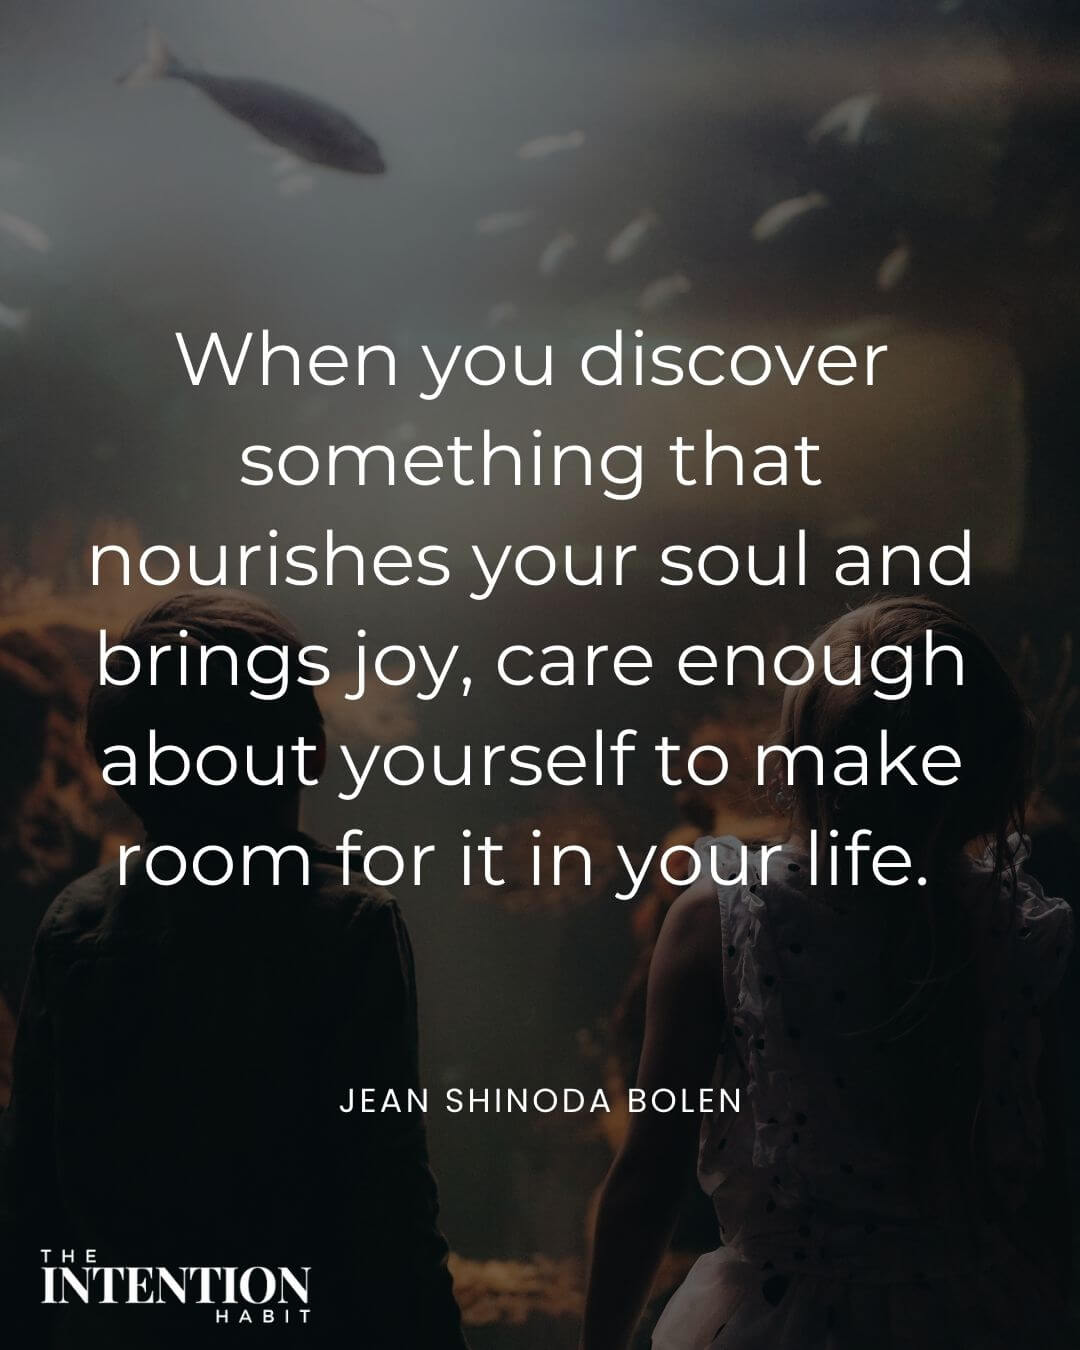 Intentional living quote - When you discover something that nourishes your soul and brings you joy, care enough about yourself to make room for it in your life